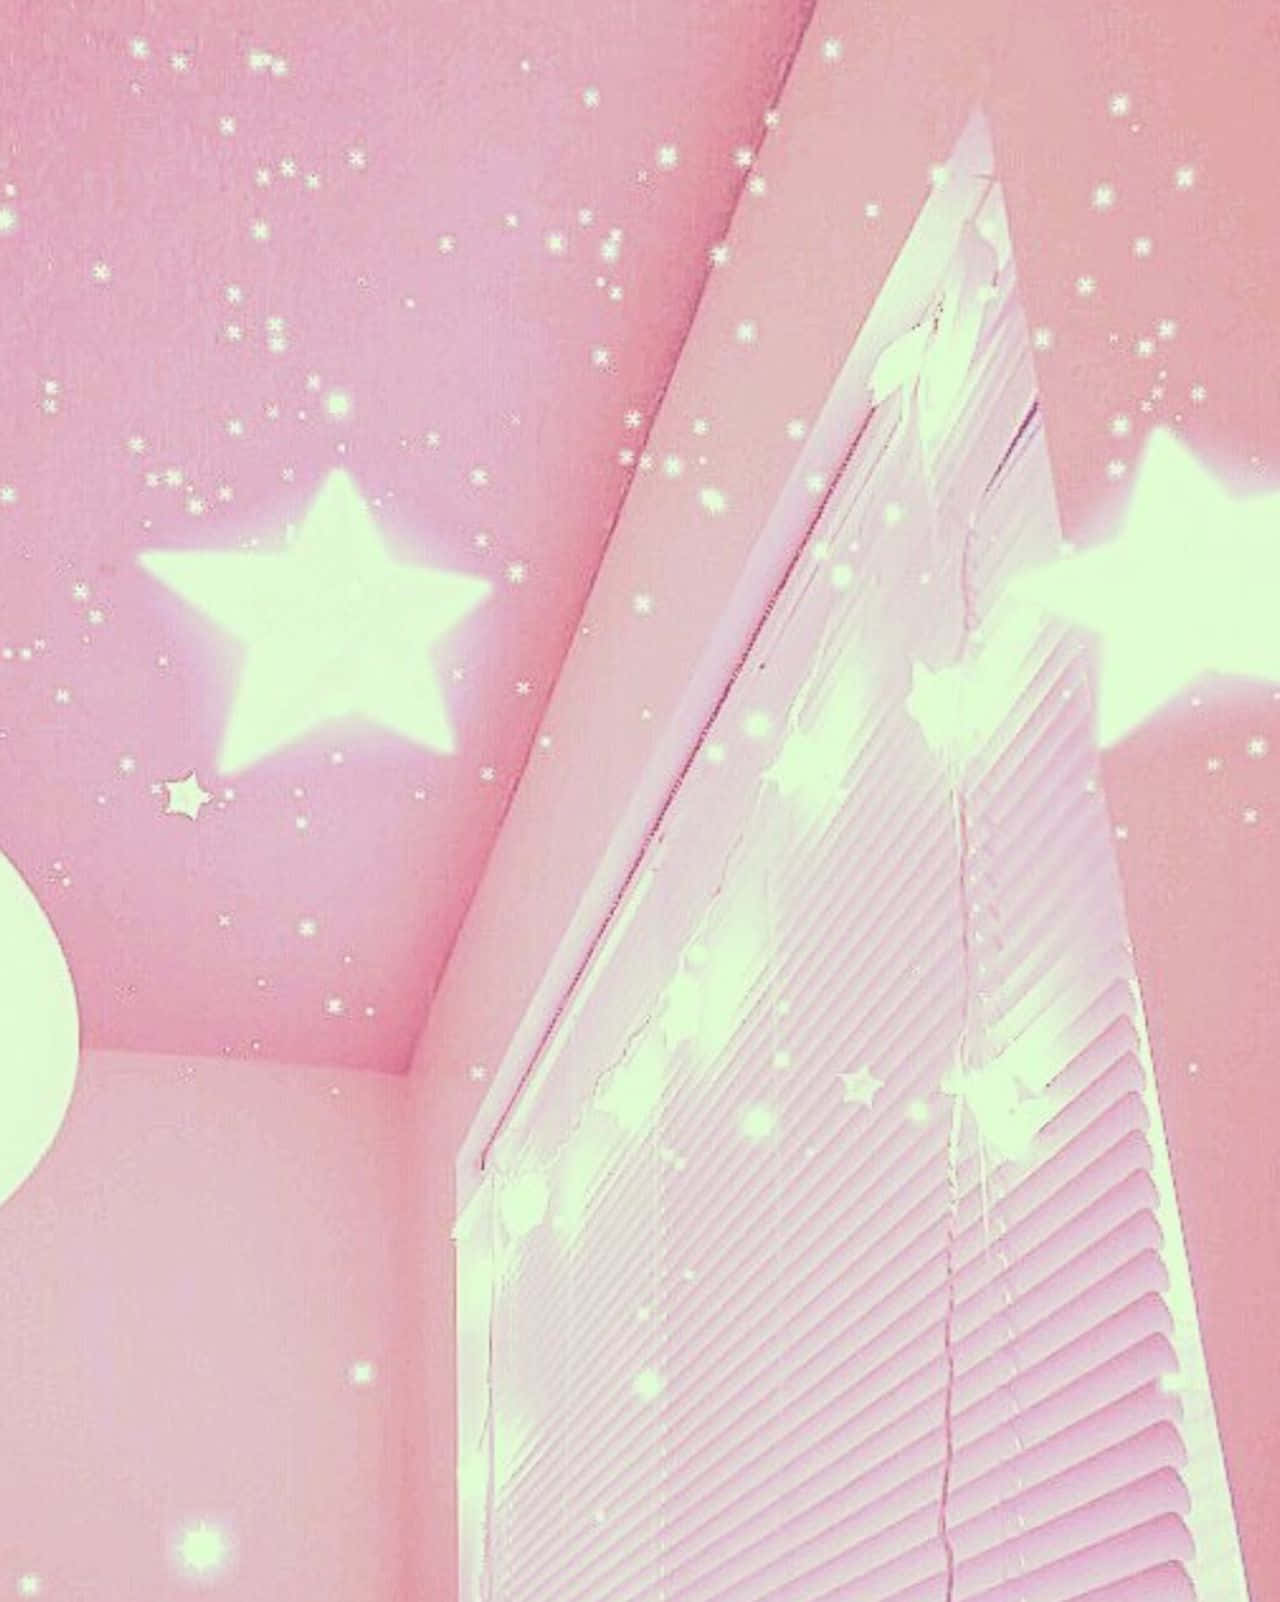 Tumblr Pastel Aesthetic Room Decor Wallpapers